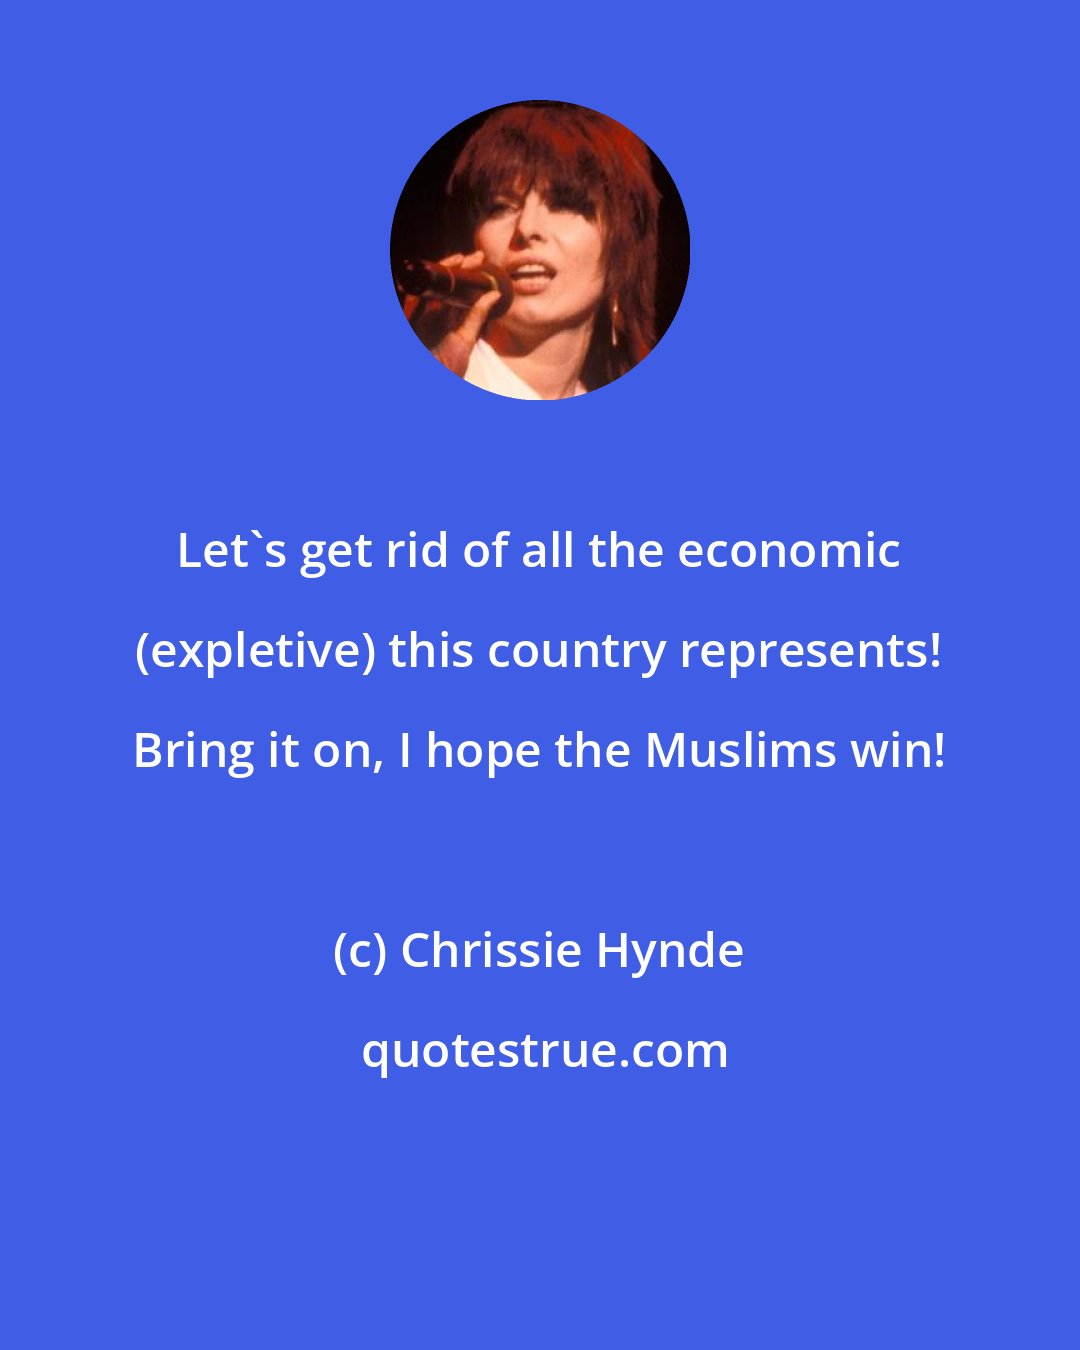 Chrissie Hynde: Let's get rid of all the economic (expletive) this country represents! Bring it on, I hope the Muslims win!